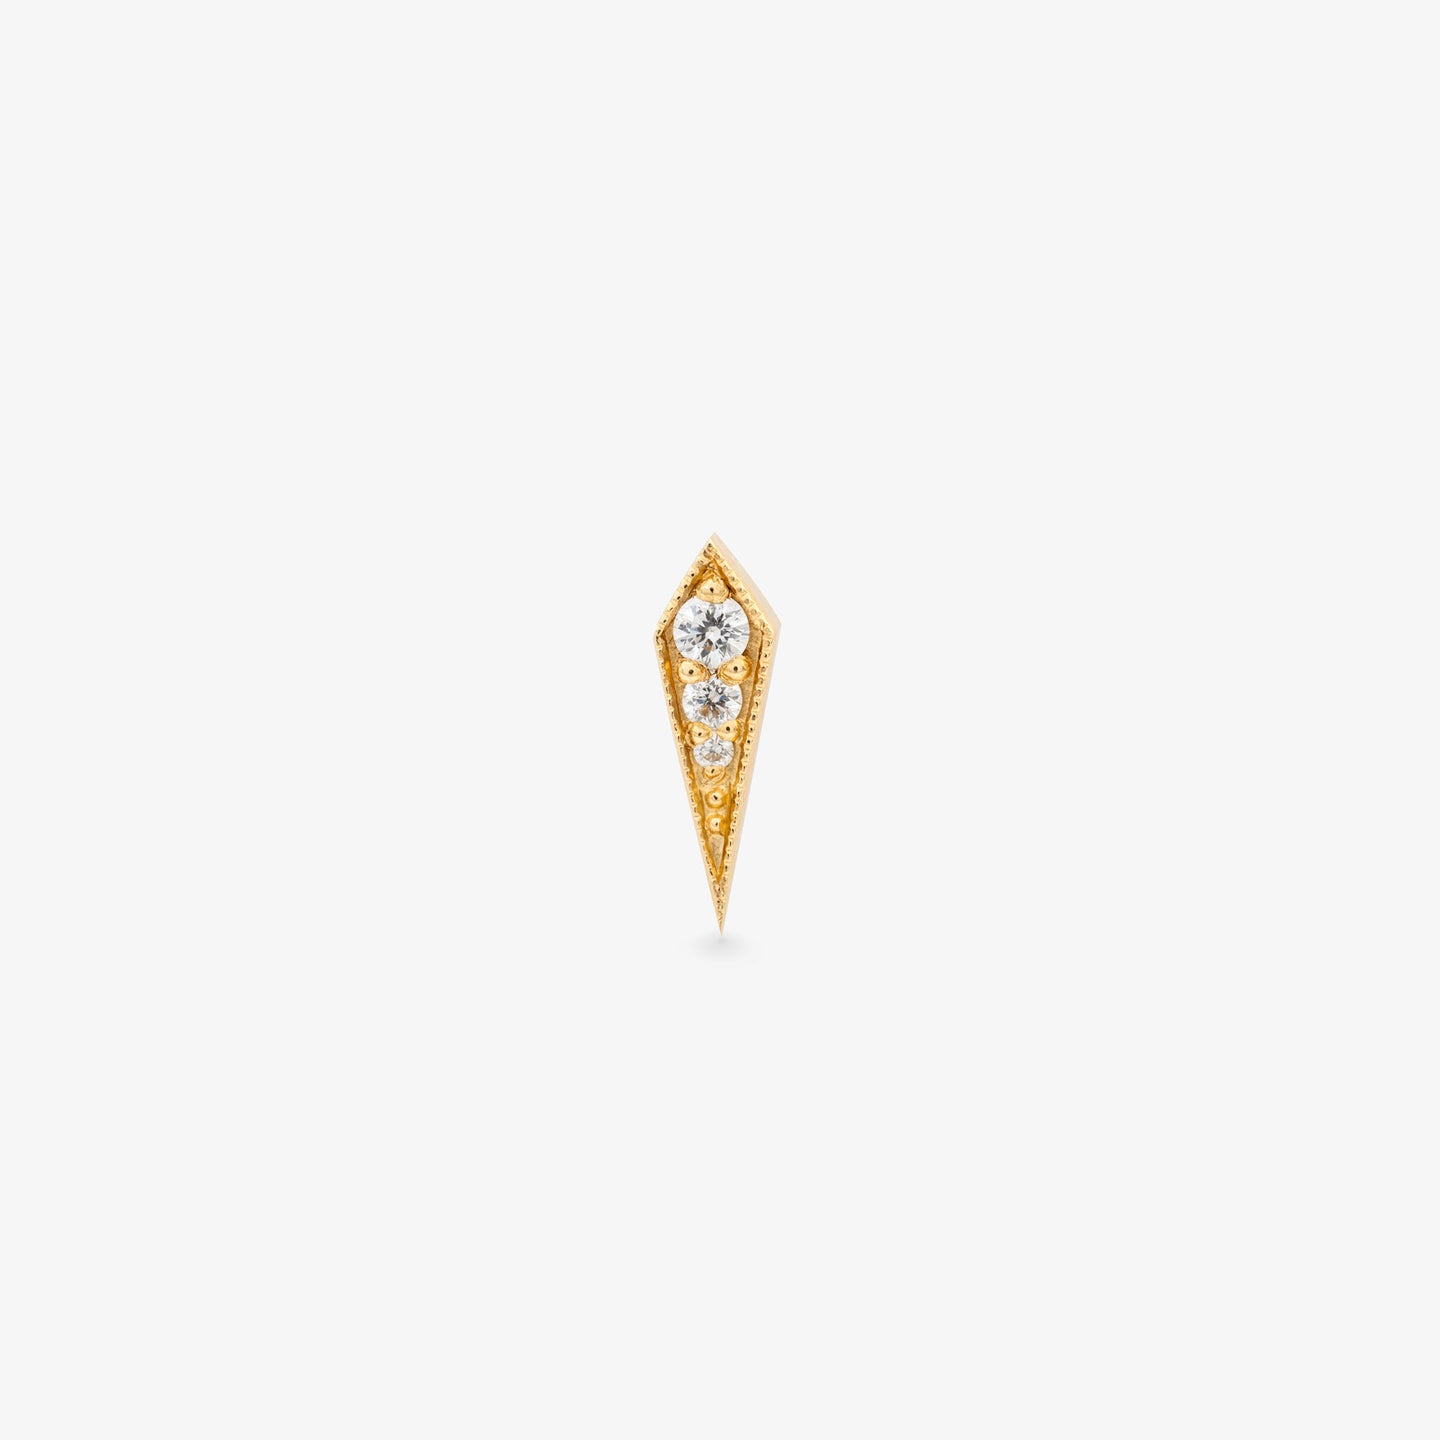 This is a large 18k gold stud shaped like a kite with 3 diamond accents color:null|18k gold/diamond